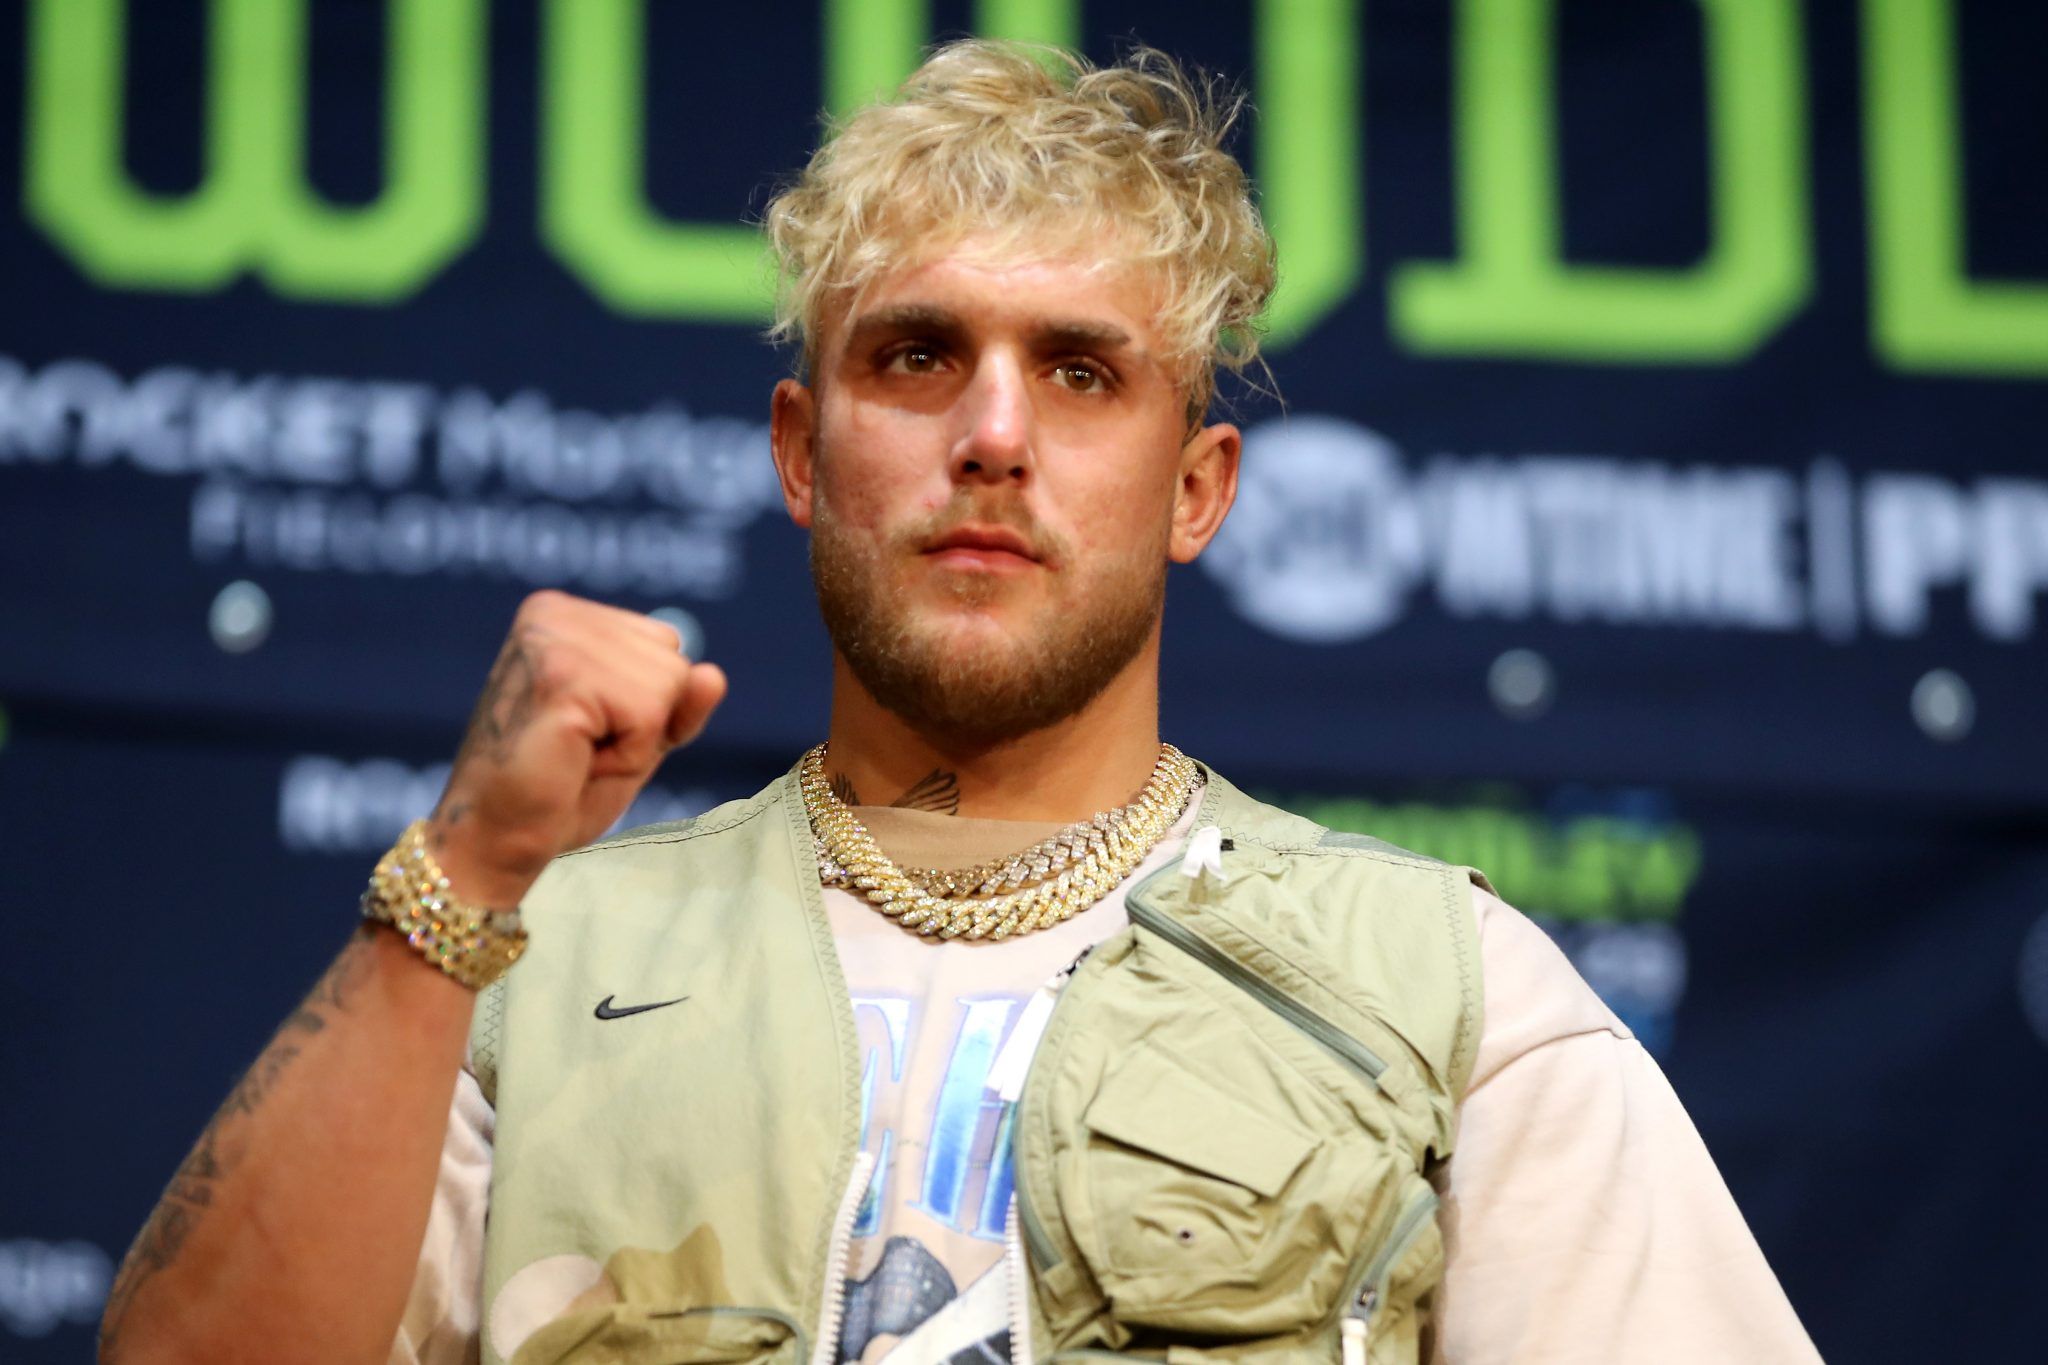 Logan Paul says brother Jake Paul is 'poor' after cryptocurrency